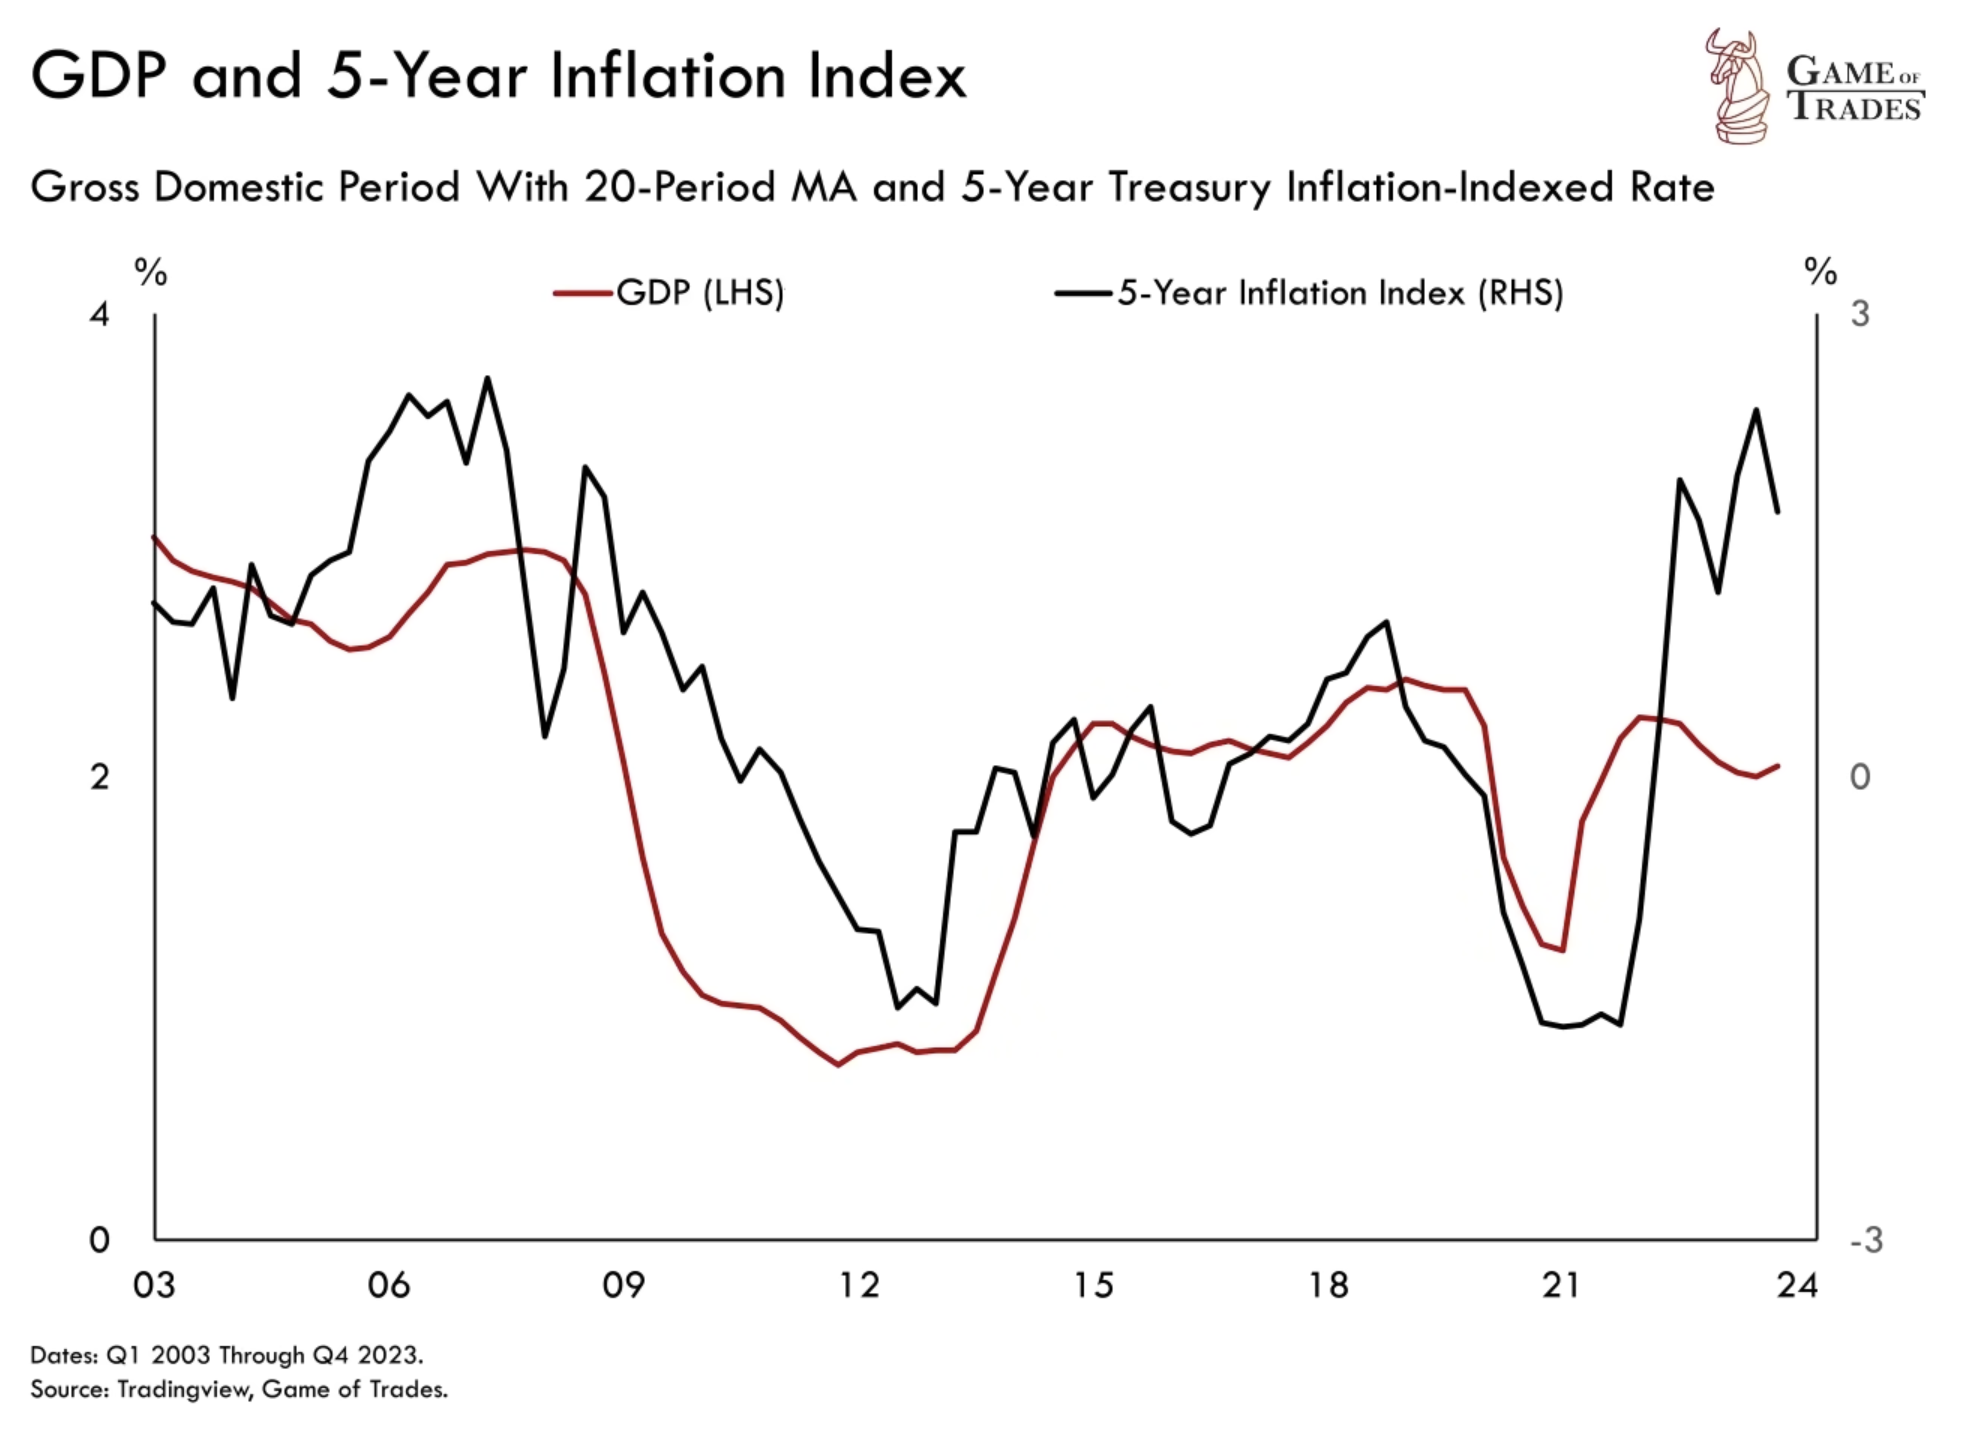 GDP and 5-Year Inflation Index